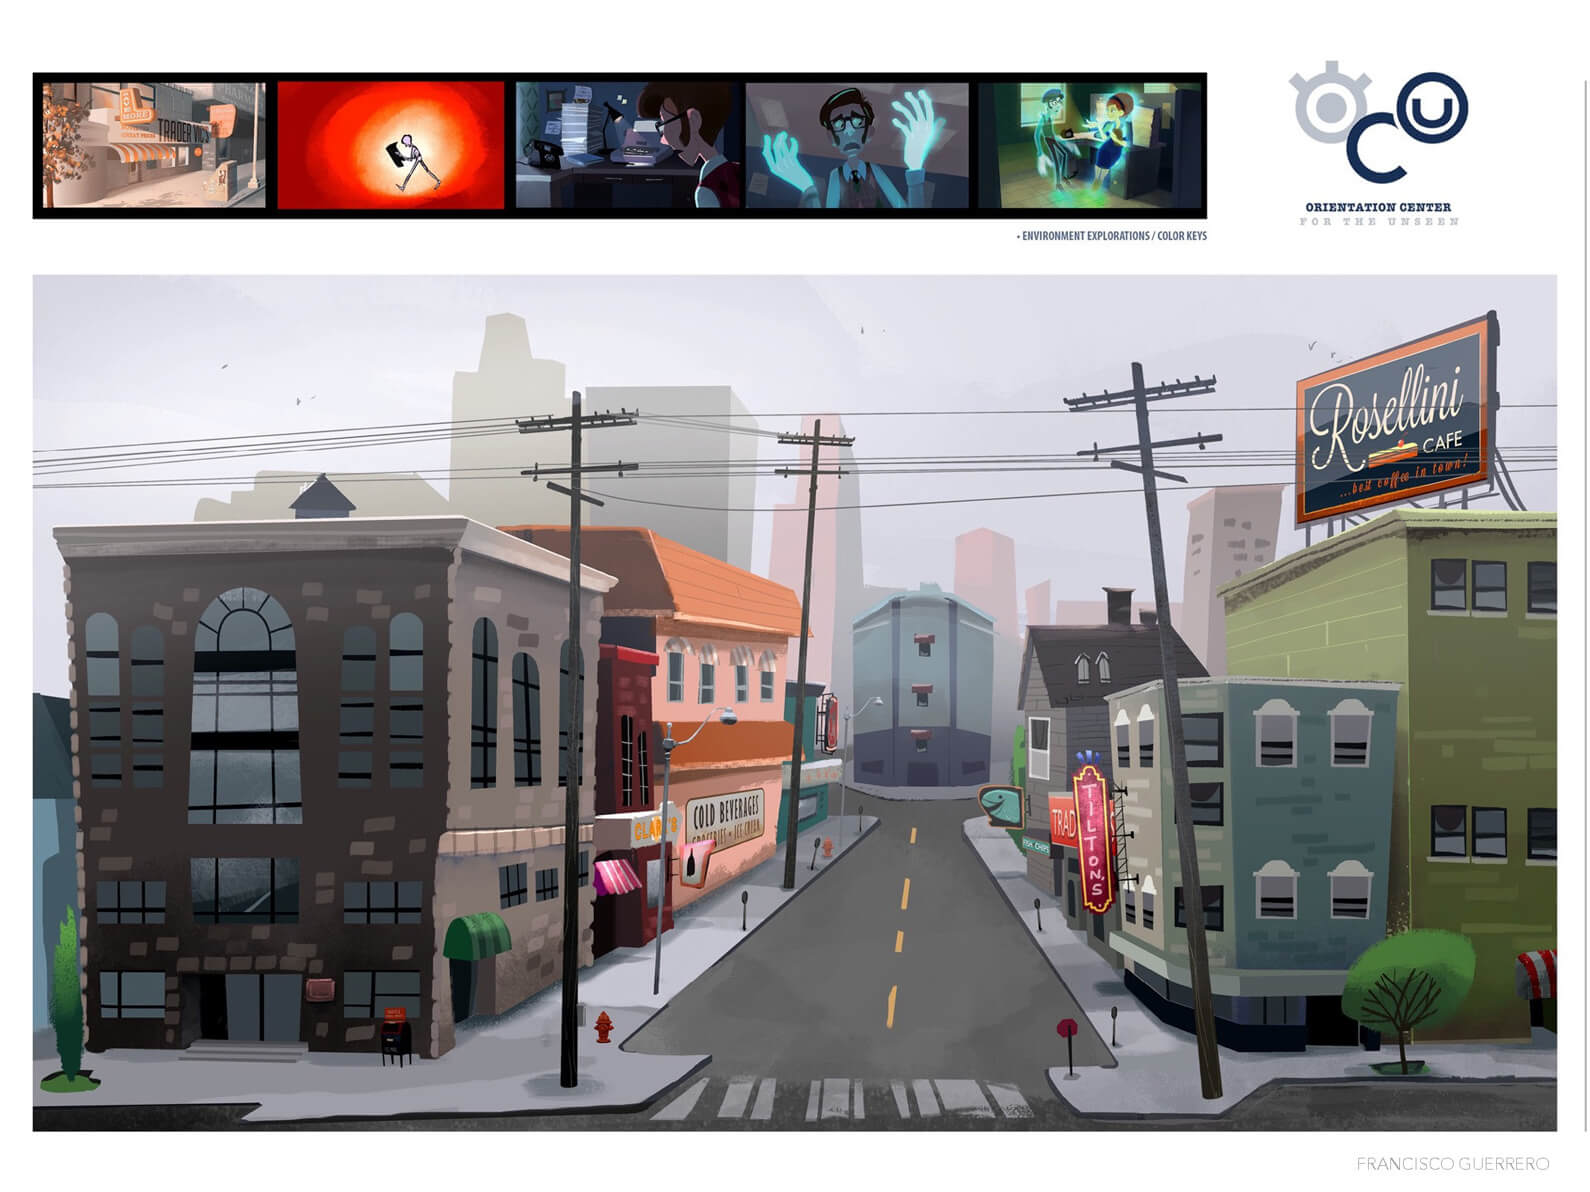 2D Color environment exploration and color key for the street setting in Orientation Center for the Unseen